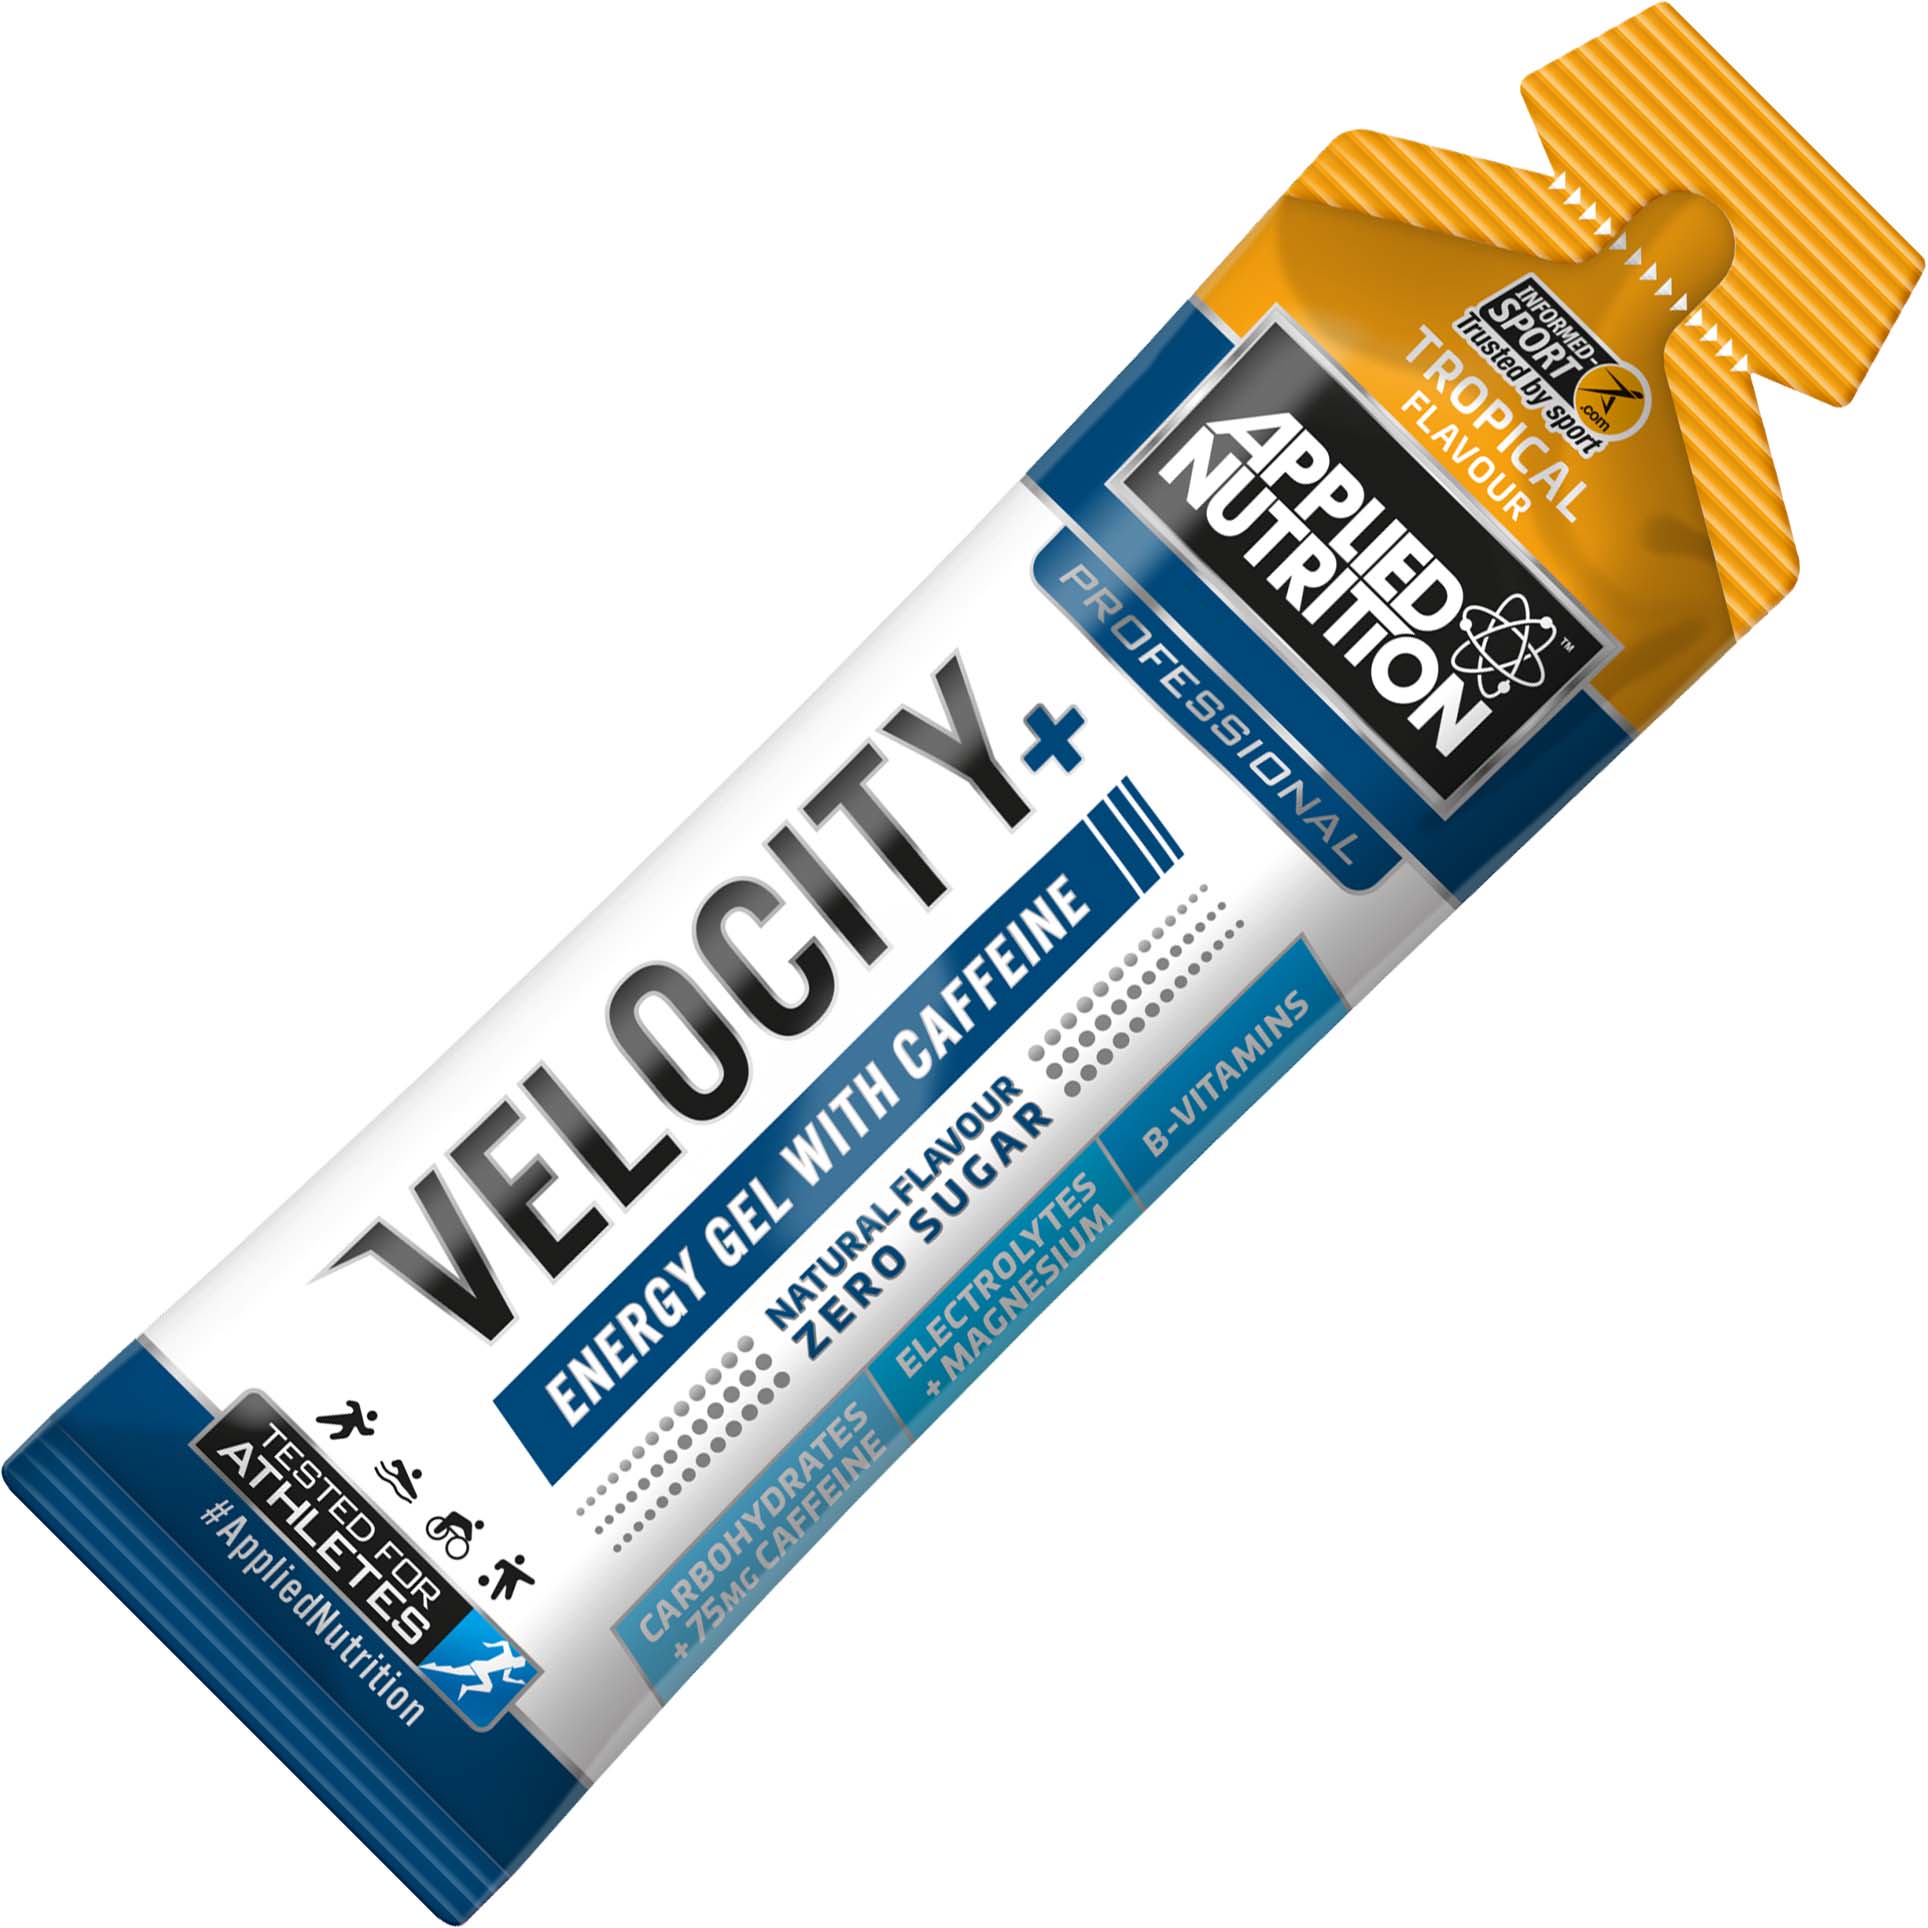 Applied Nutrition Velocity Isotonic Energy Gel with Caffeine 1 Piece Tropical